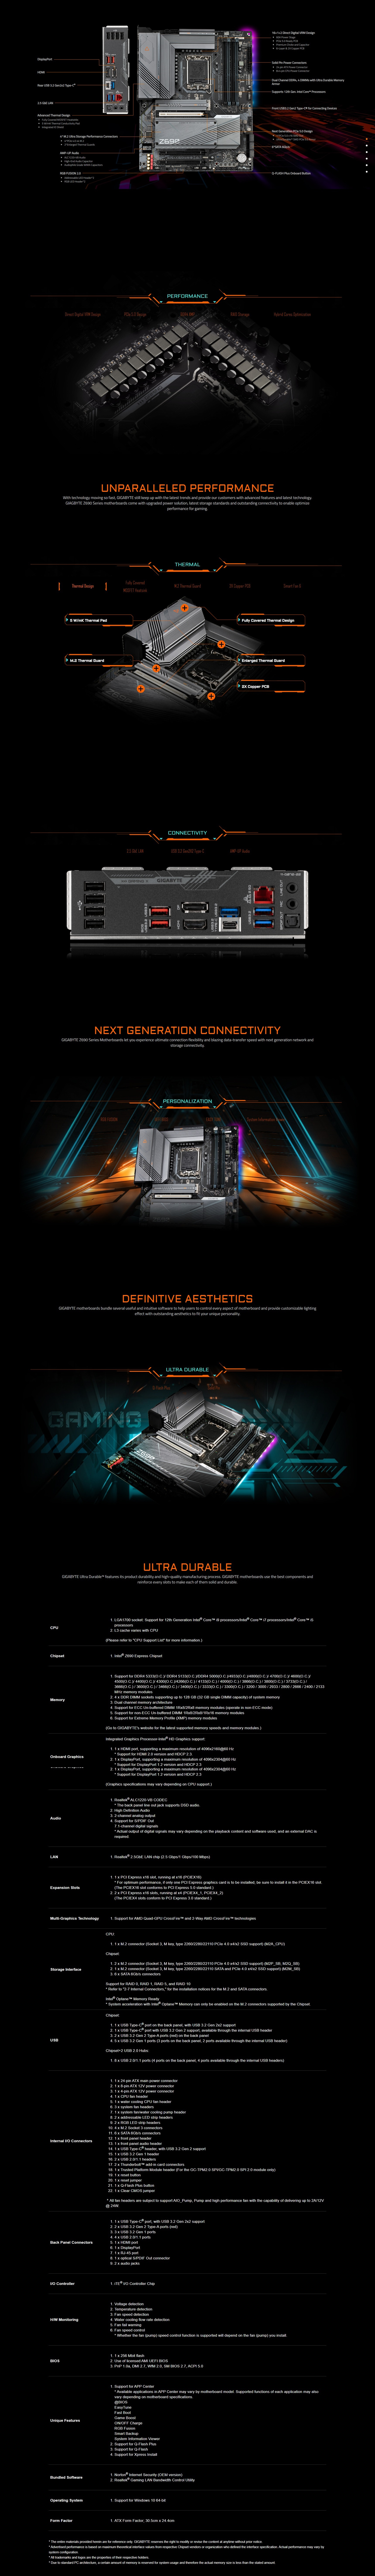 A large marketing image providing additional information about the product Gigabyte Z690 Gaming X DDR4 LGA1700 ATX Desktop Motherboard - Additional alt info not provided